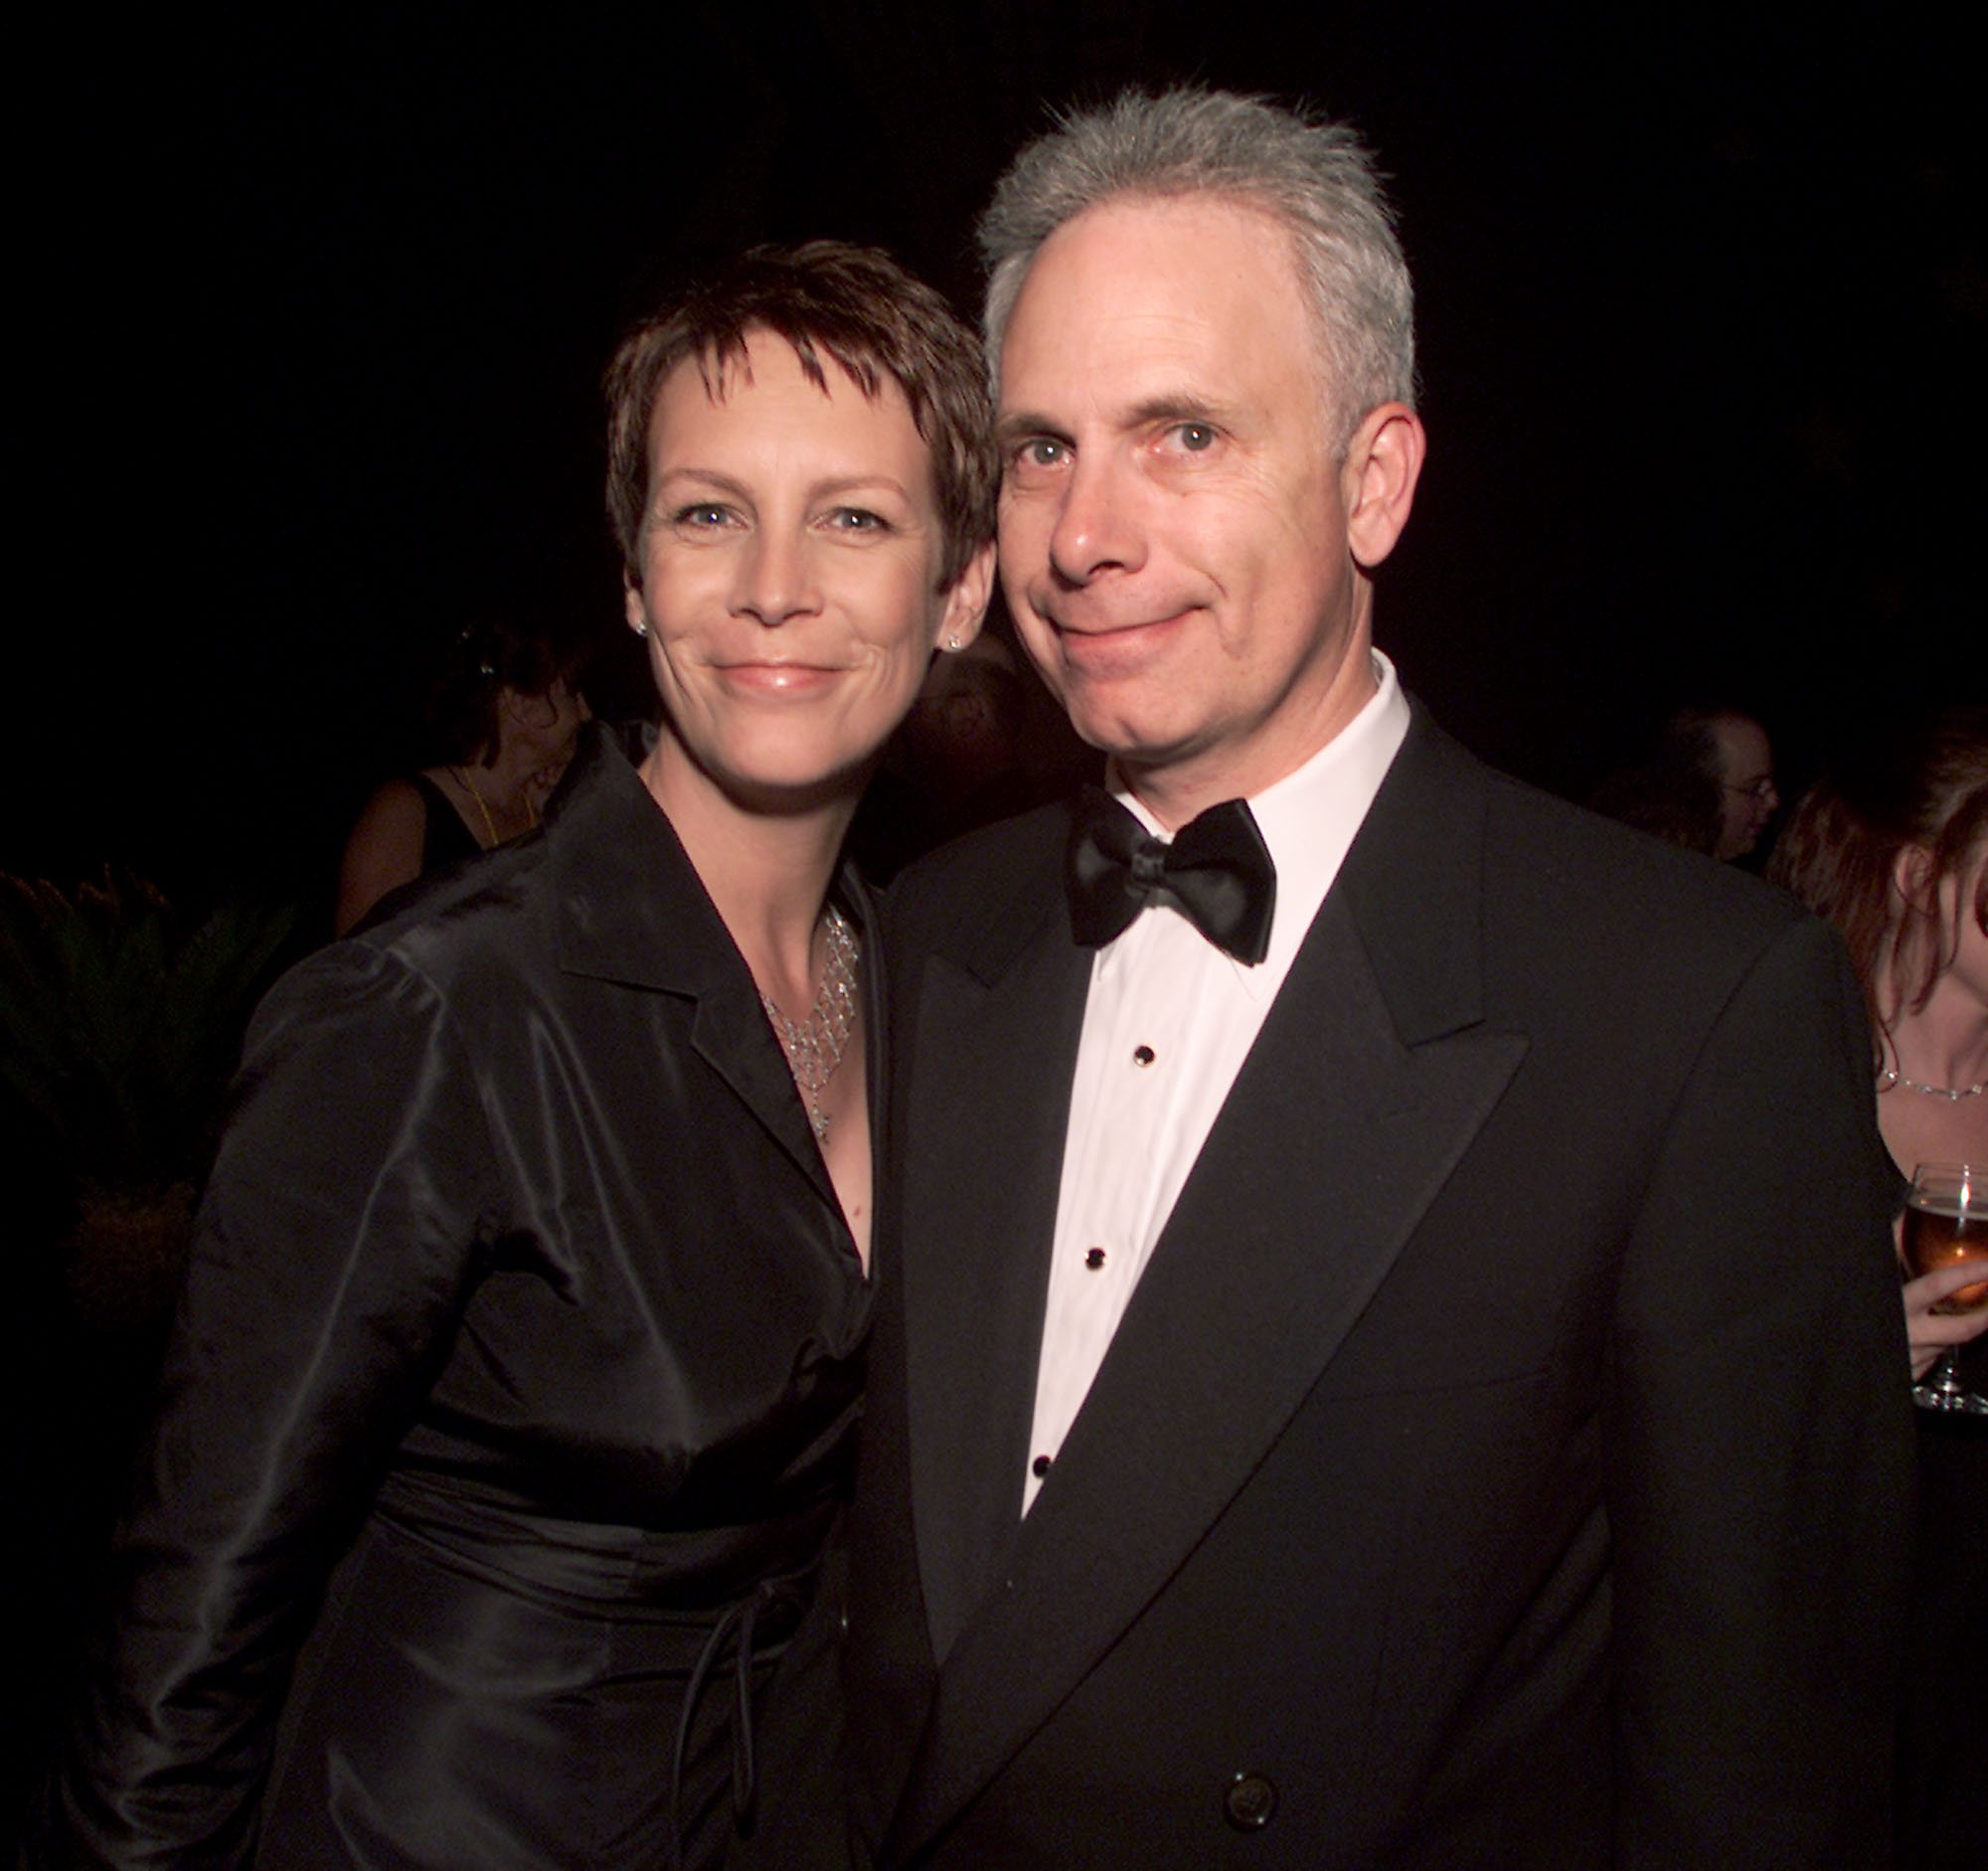 Jamie Lee Curtis and husband Christopher Guest at Comedy Central's post-party after the 15th Annual American Comedy Awards, Los Angeles, California April, 2001 | Photo: GettyImages 